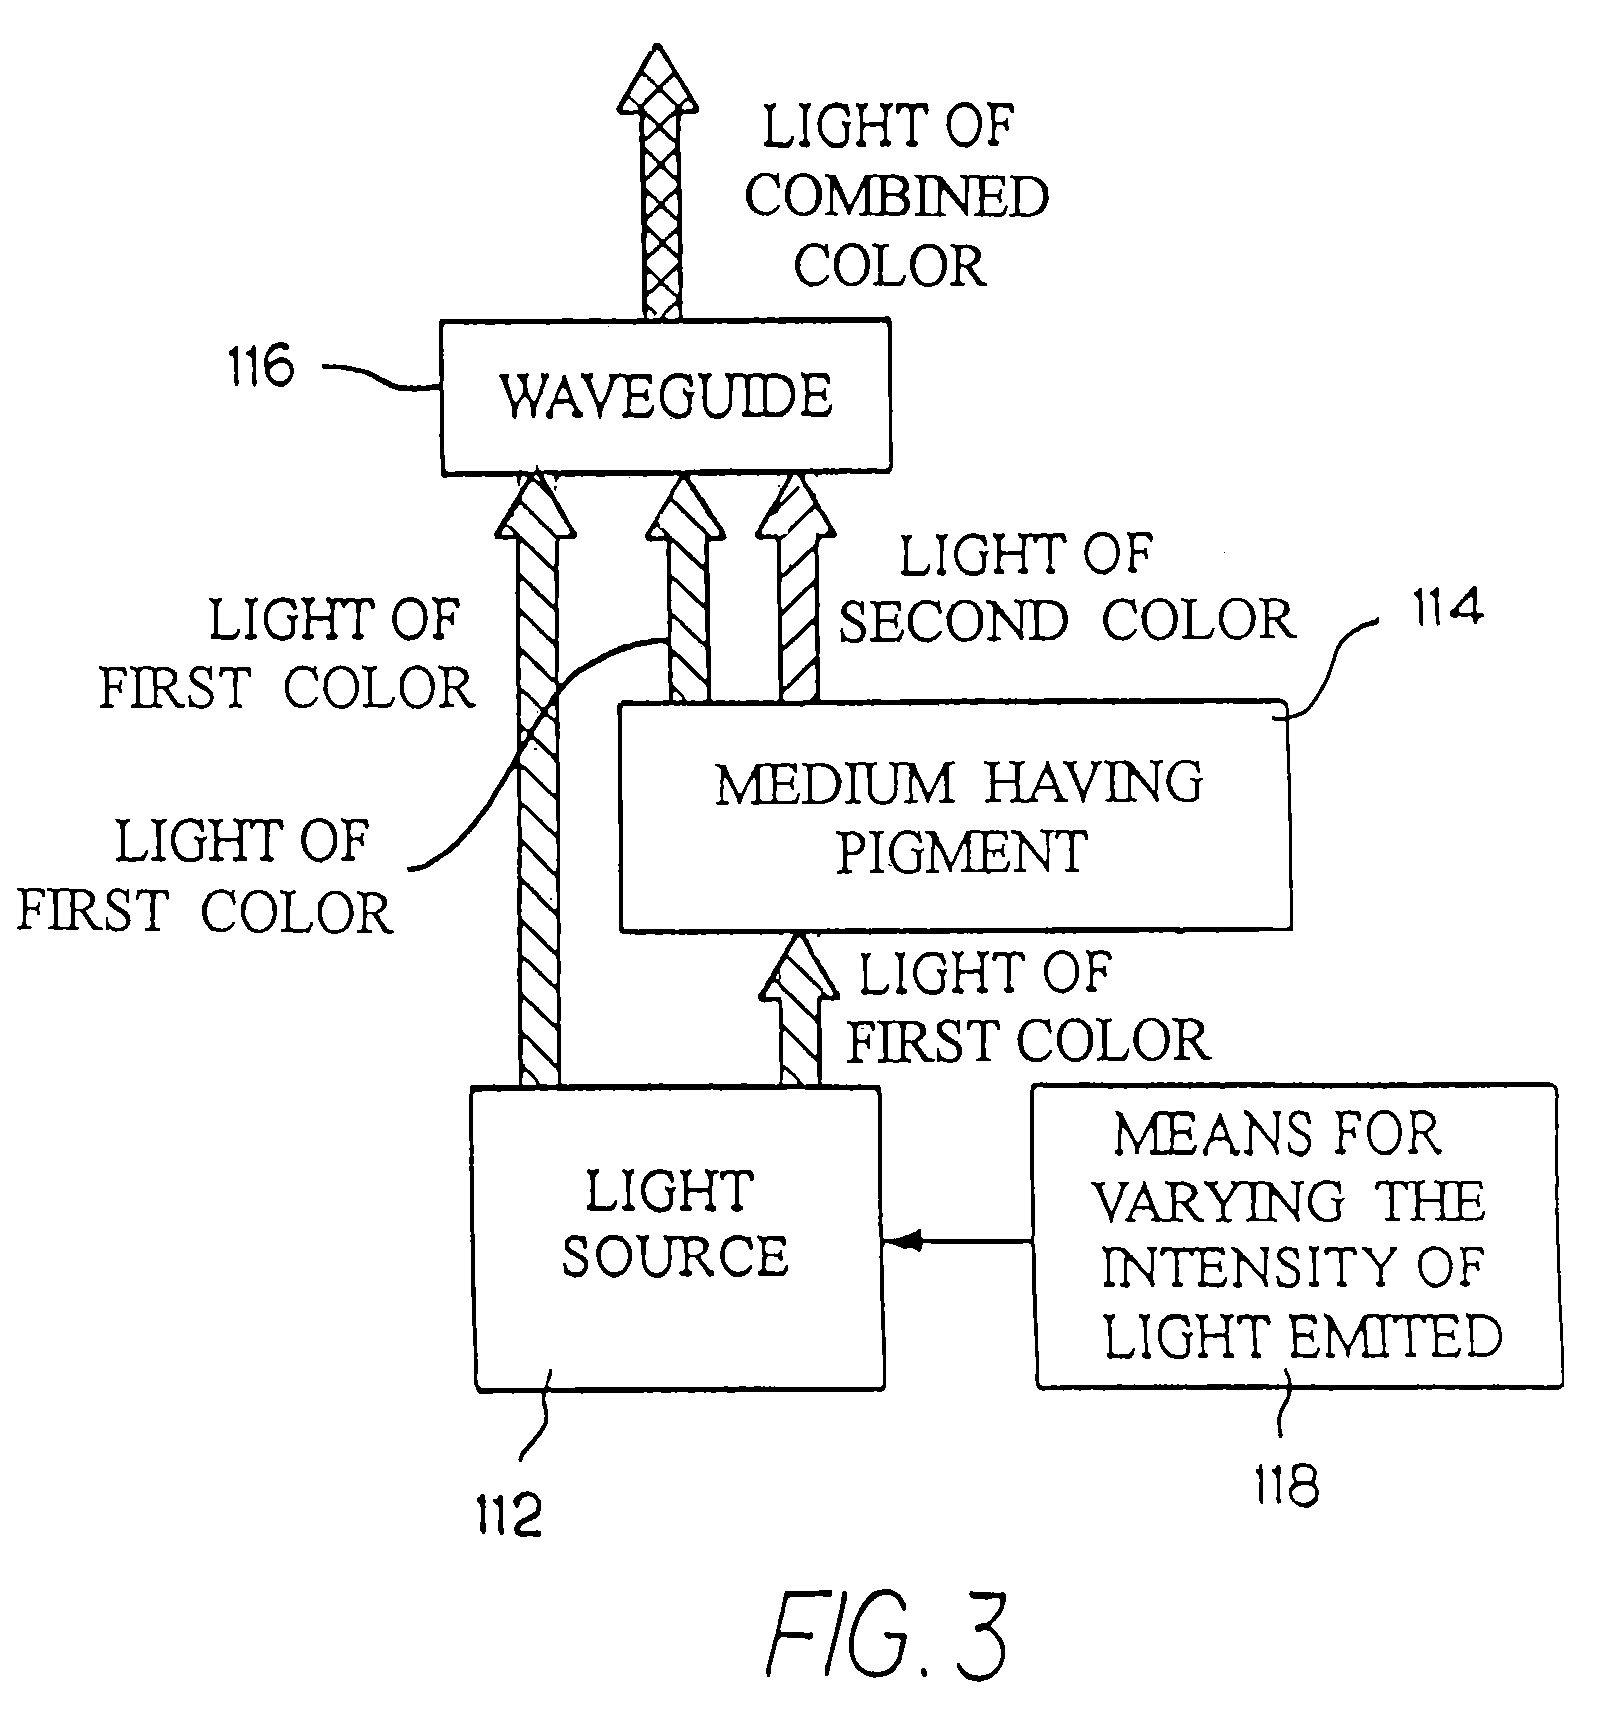 Illumination device for simulating neon or similar lighting in various colors